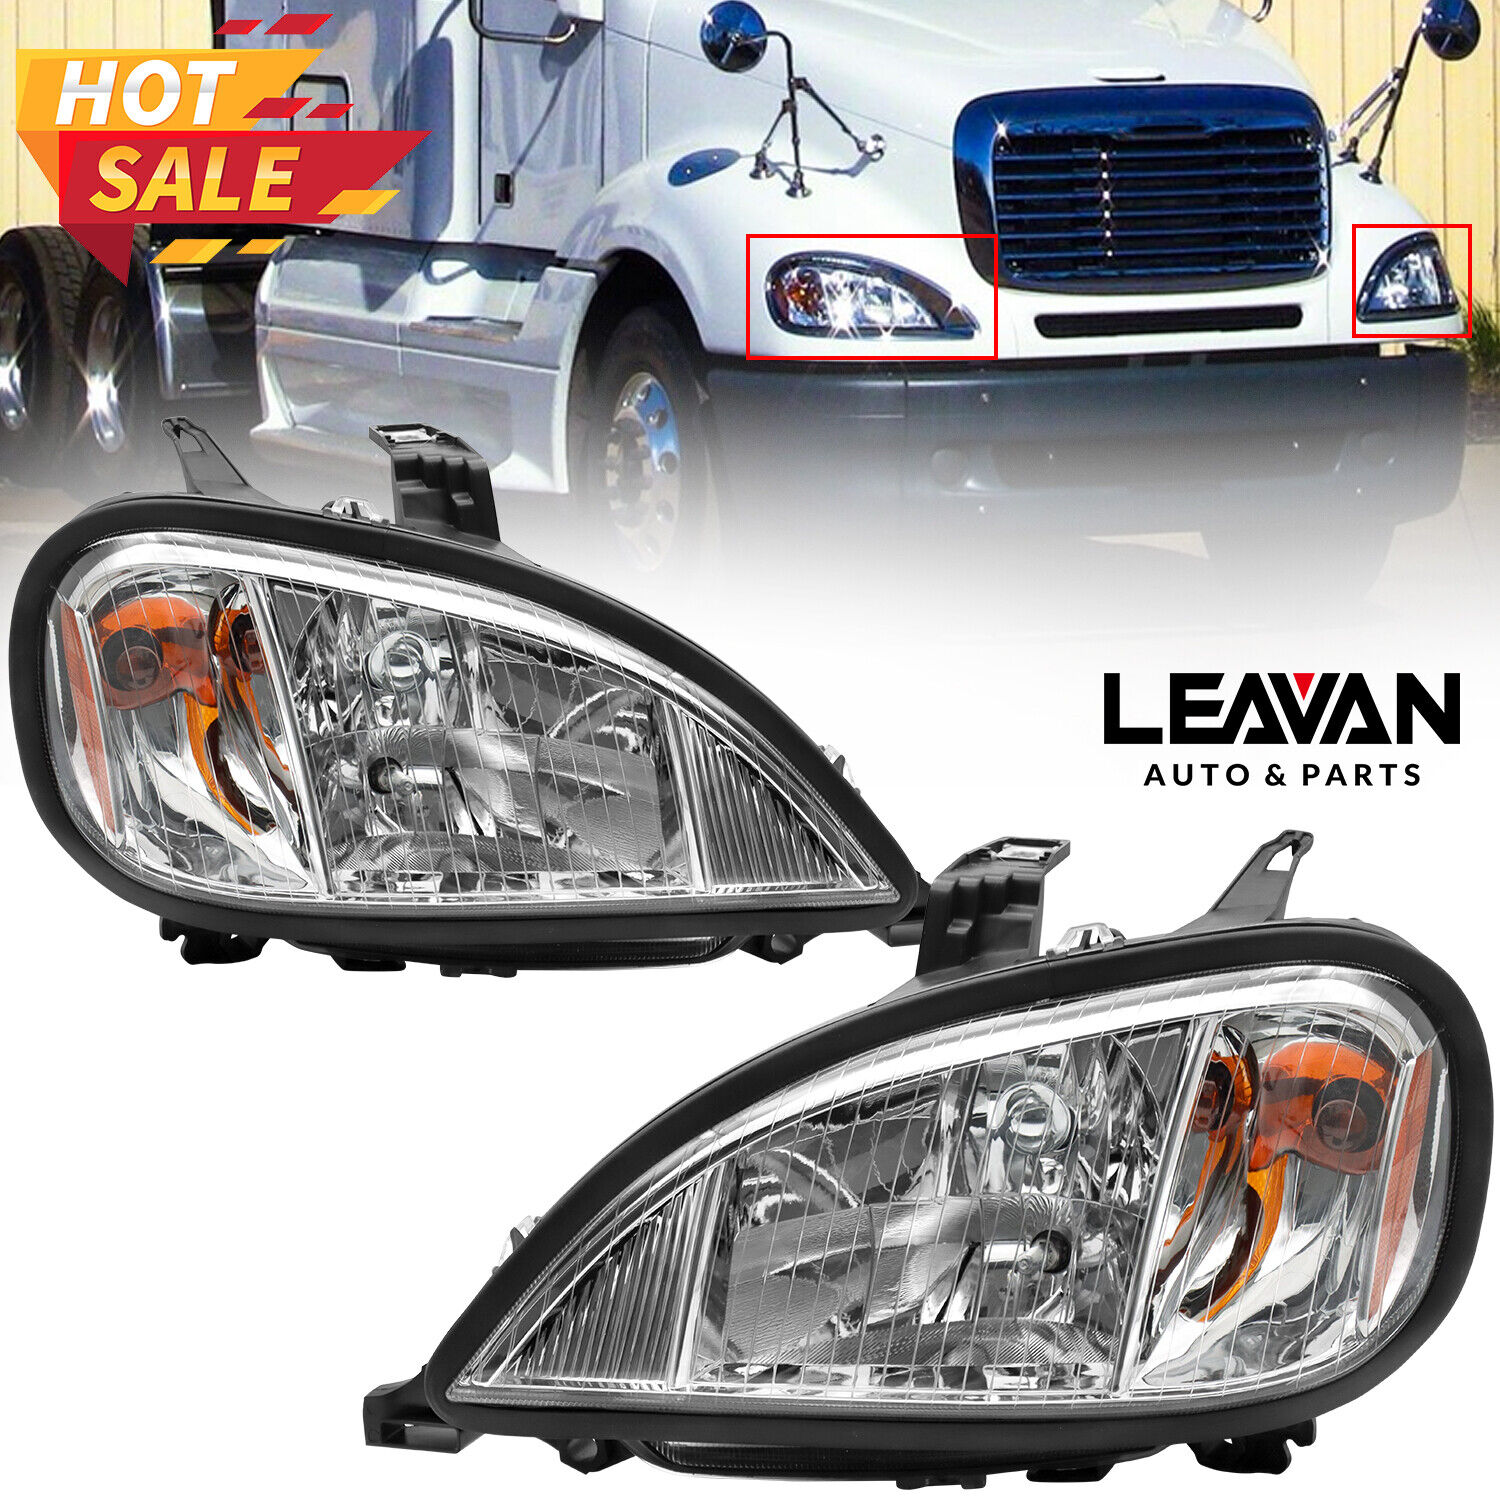 Pair of Headlights Headlamps W/ Bulb For Freightliner Columbia